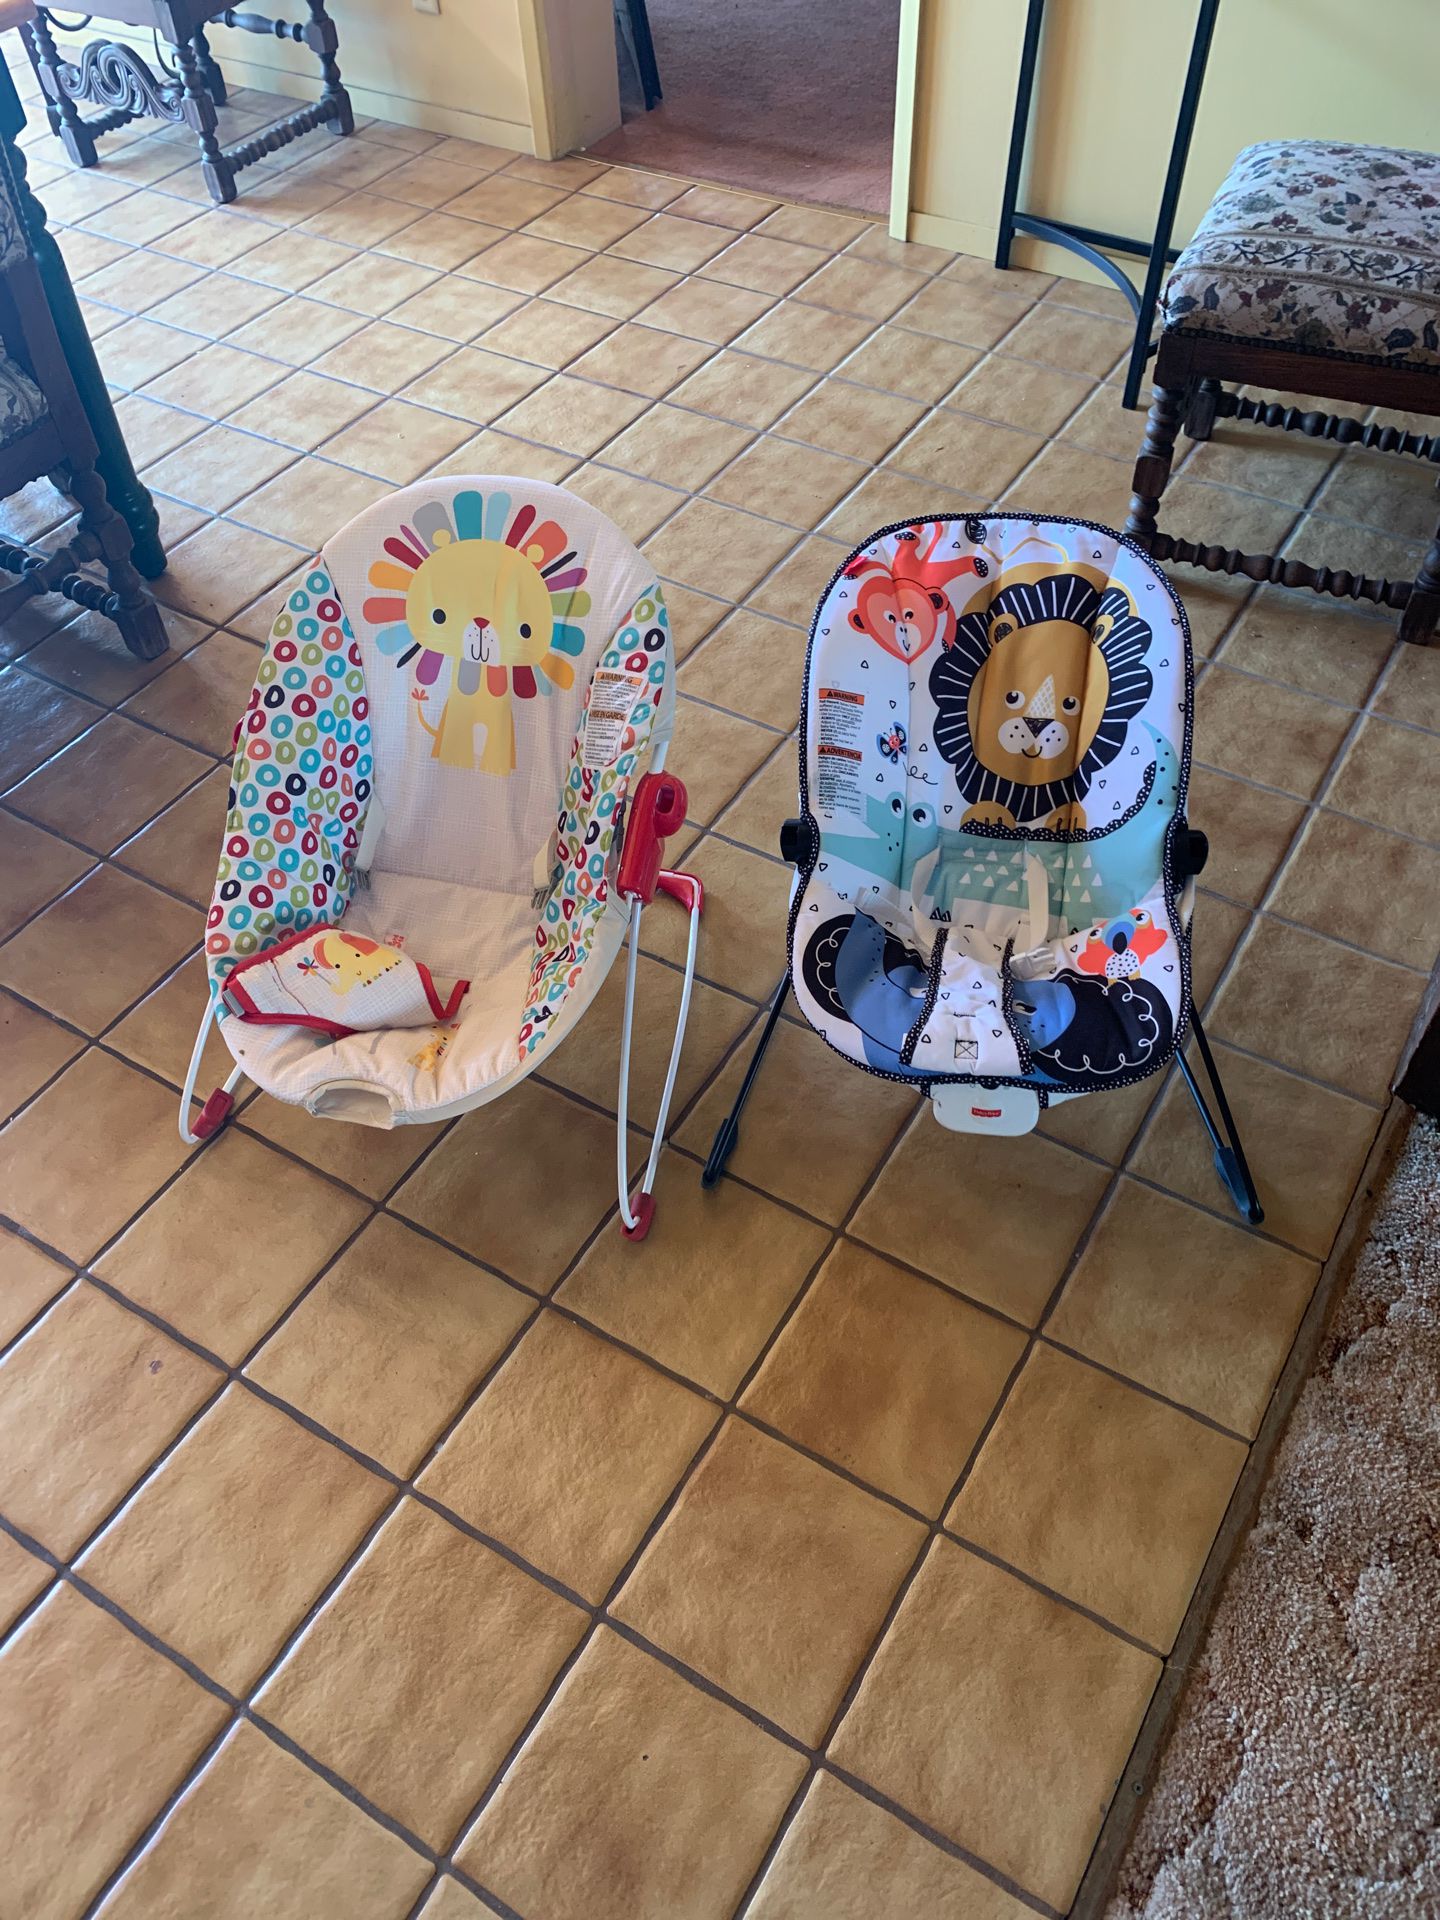 Fisher price kids bouncer chairs great and new ones used several times must sell today and everything else on my list